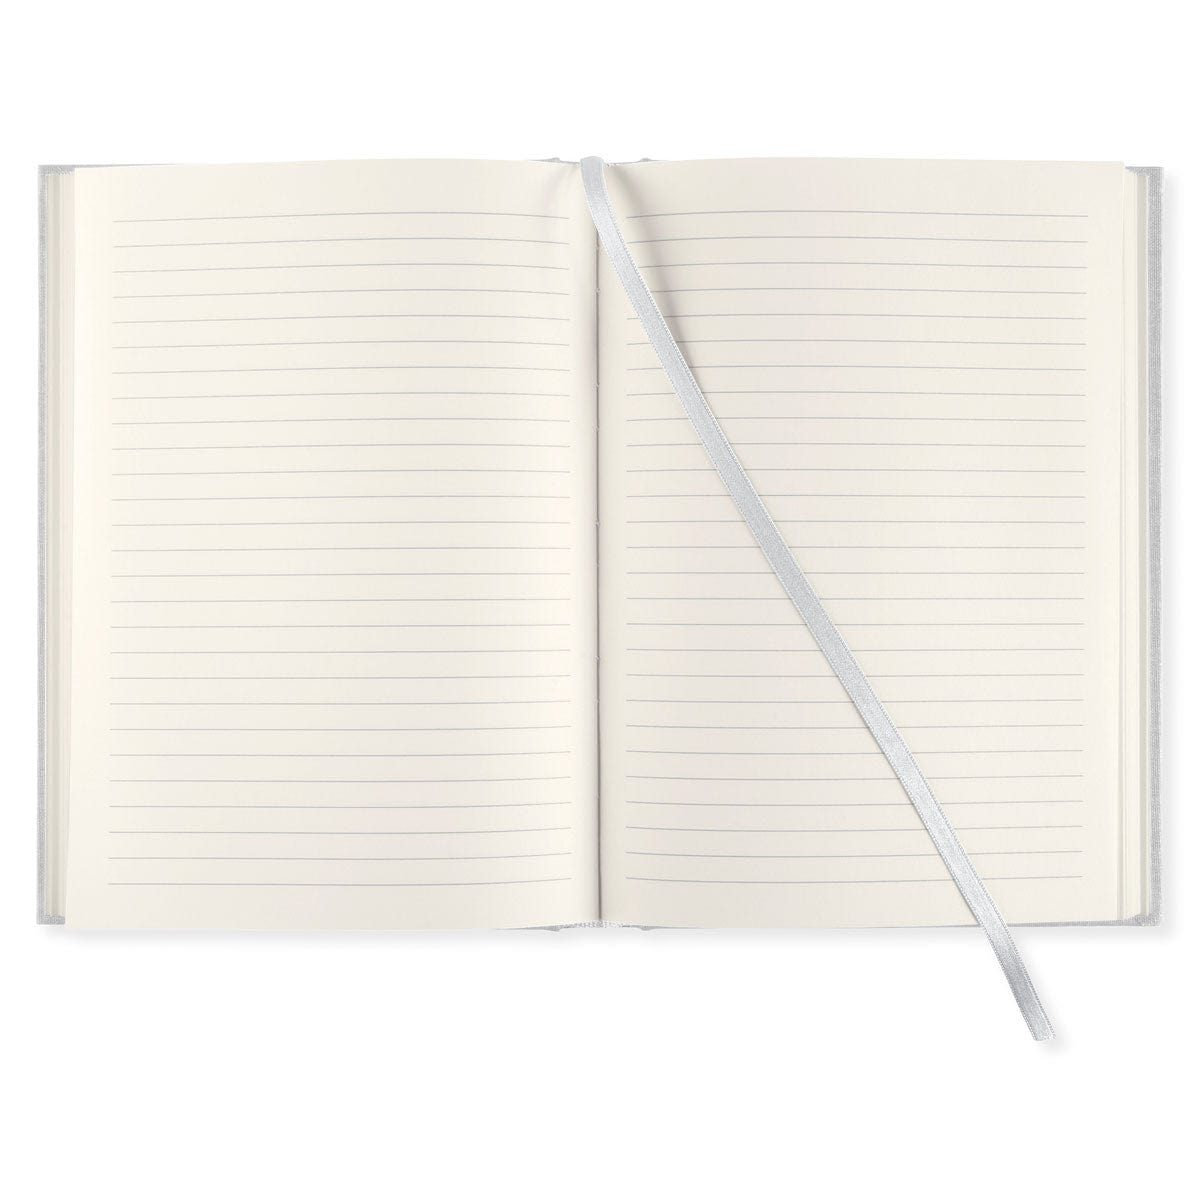 PaperStyle Paperstyle NOTEBOOK A5 128p. Ruled Transparent Black